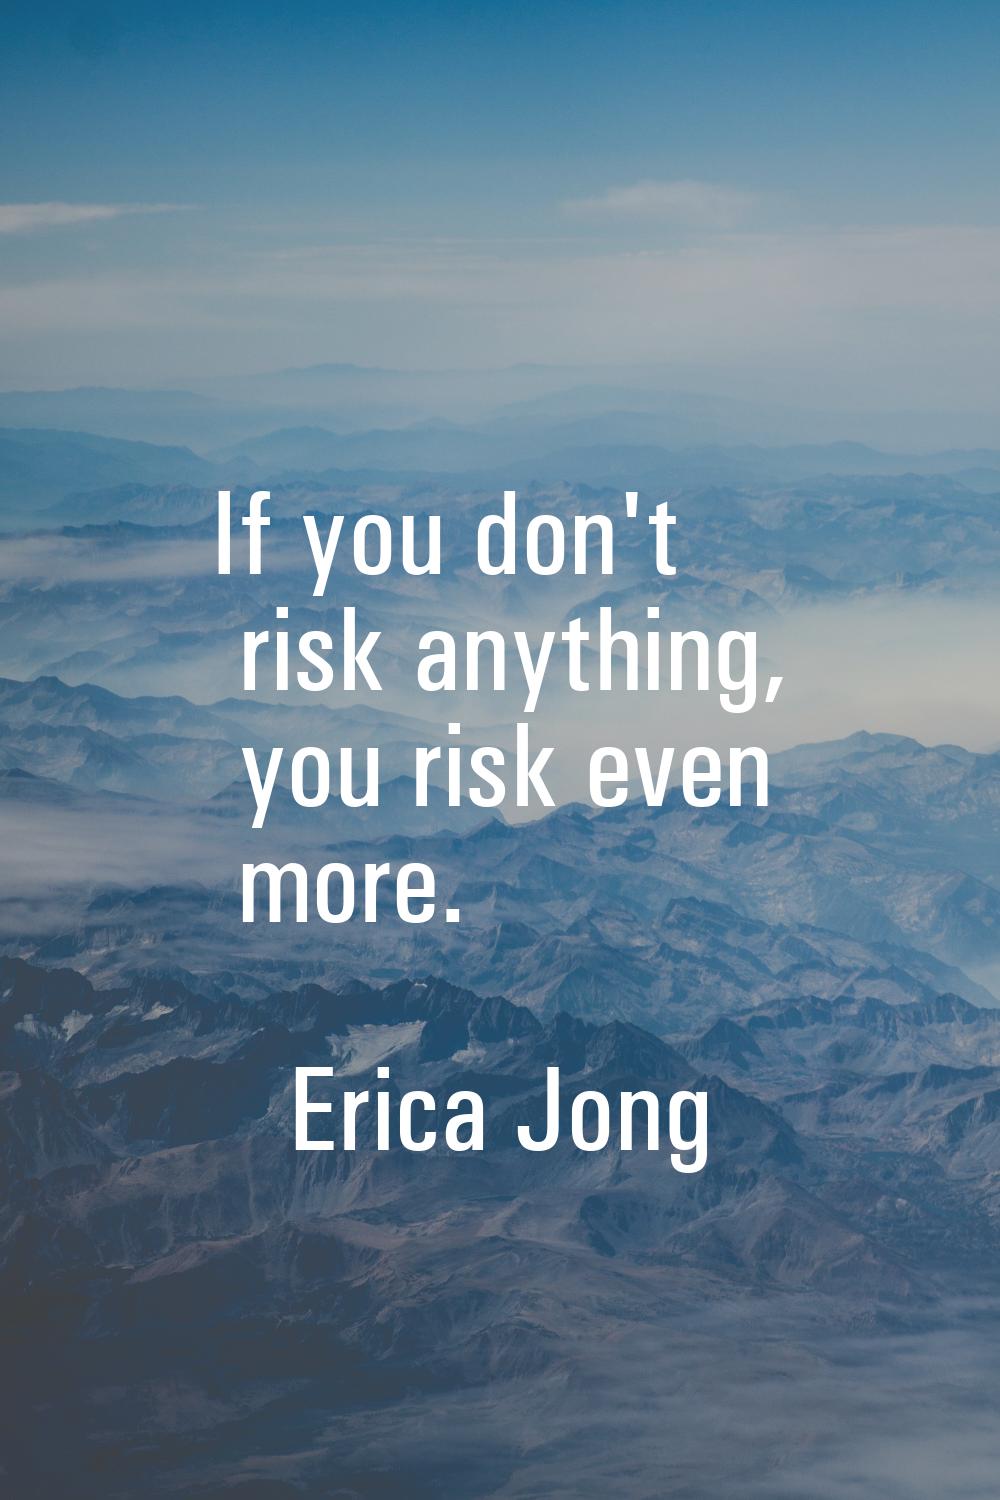 If you don't risk anything, you risk even more.